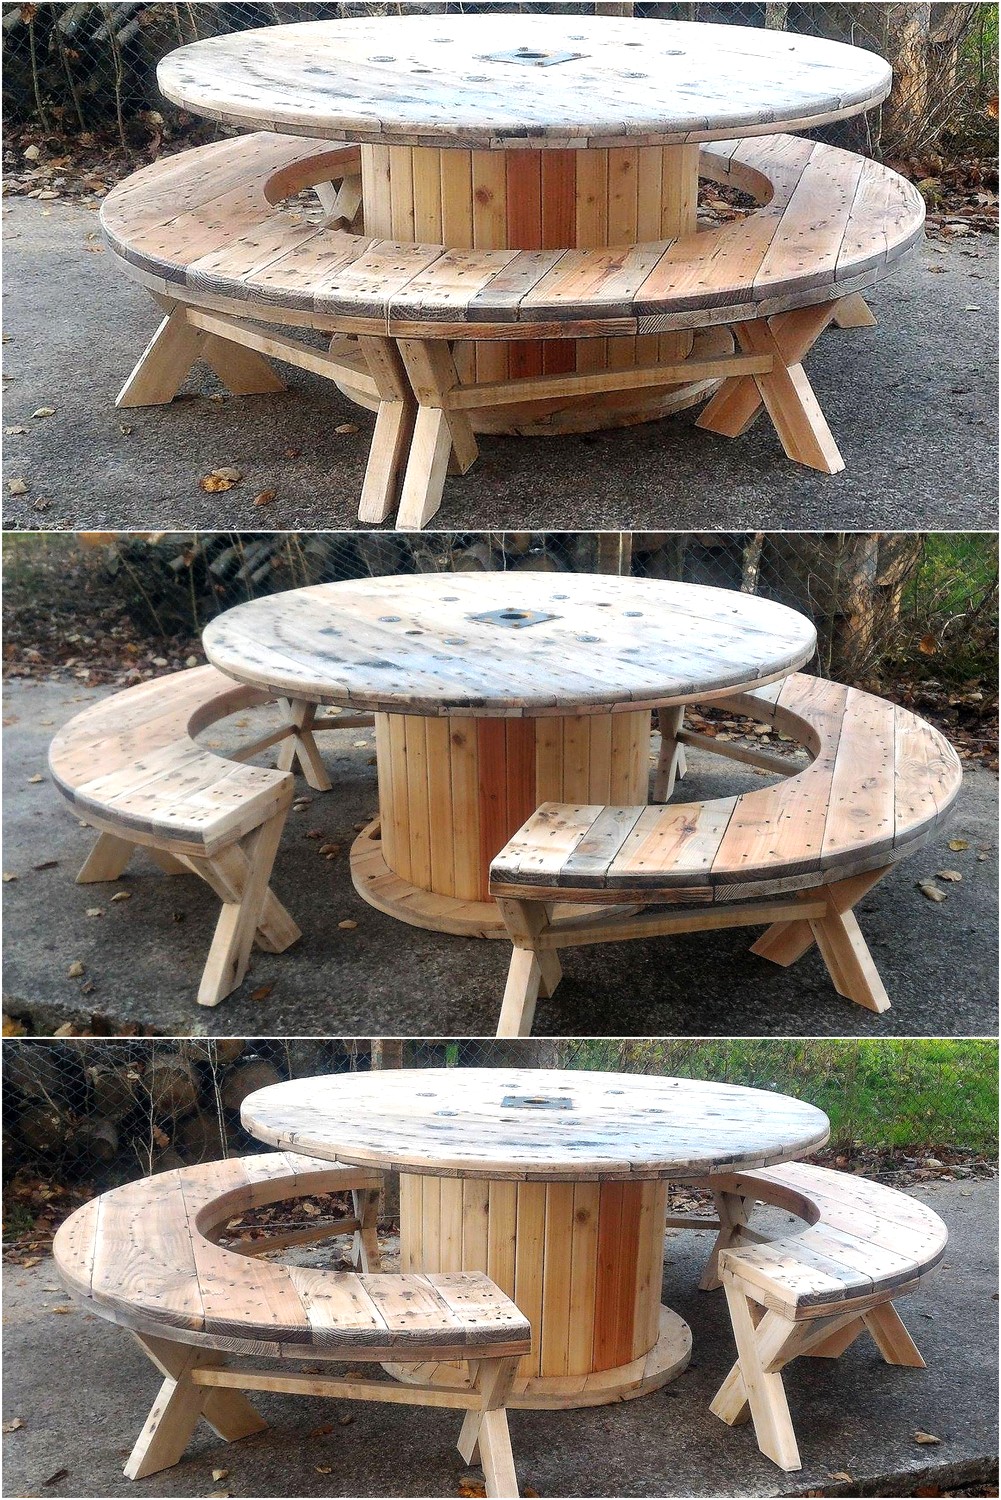 Recycled Pallet Cable Reel Patio Furniture Pallet Ideas